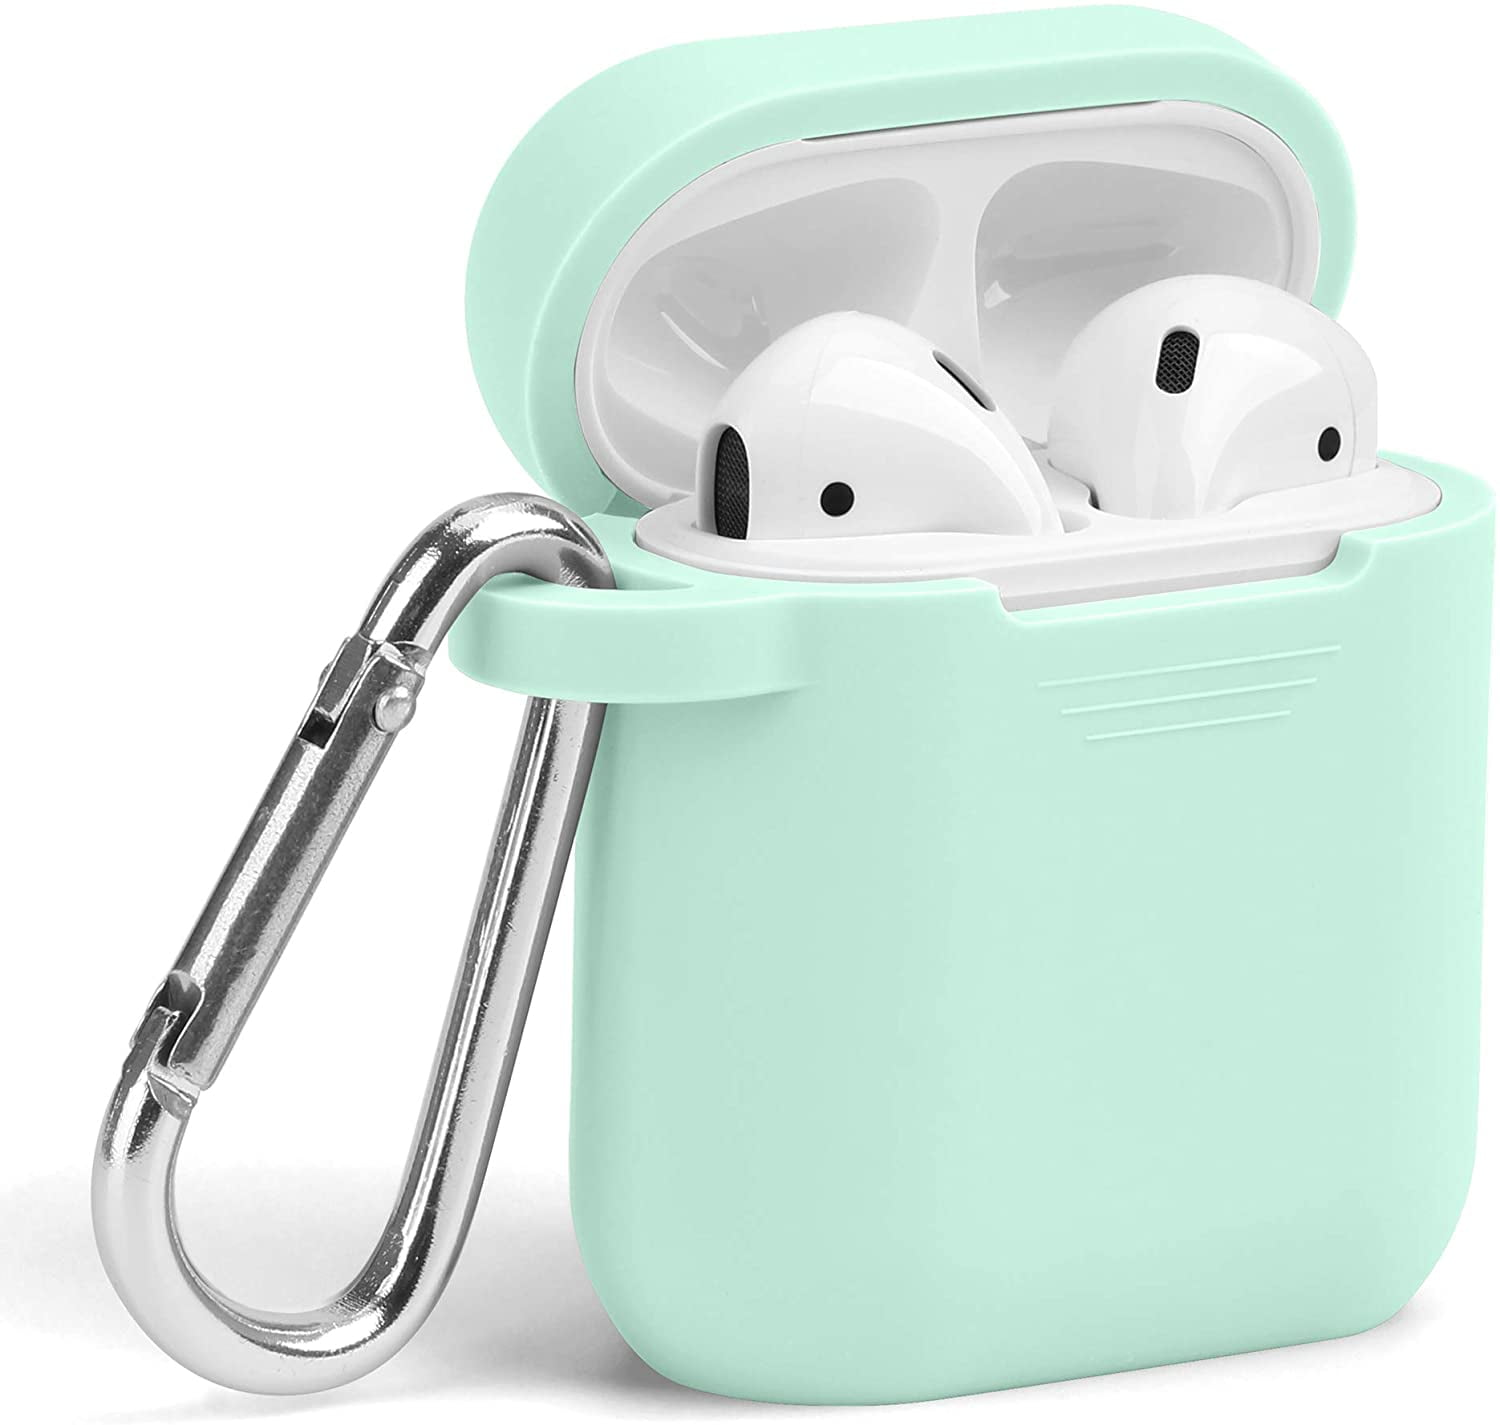 Silicone Basic Case for AirPods Pro 2 [9 Colors] Nightglow Blue